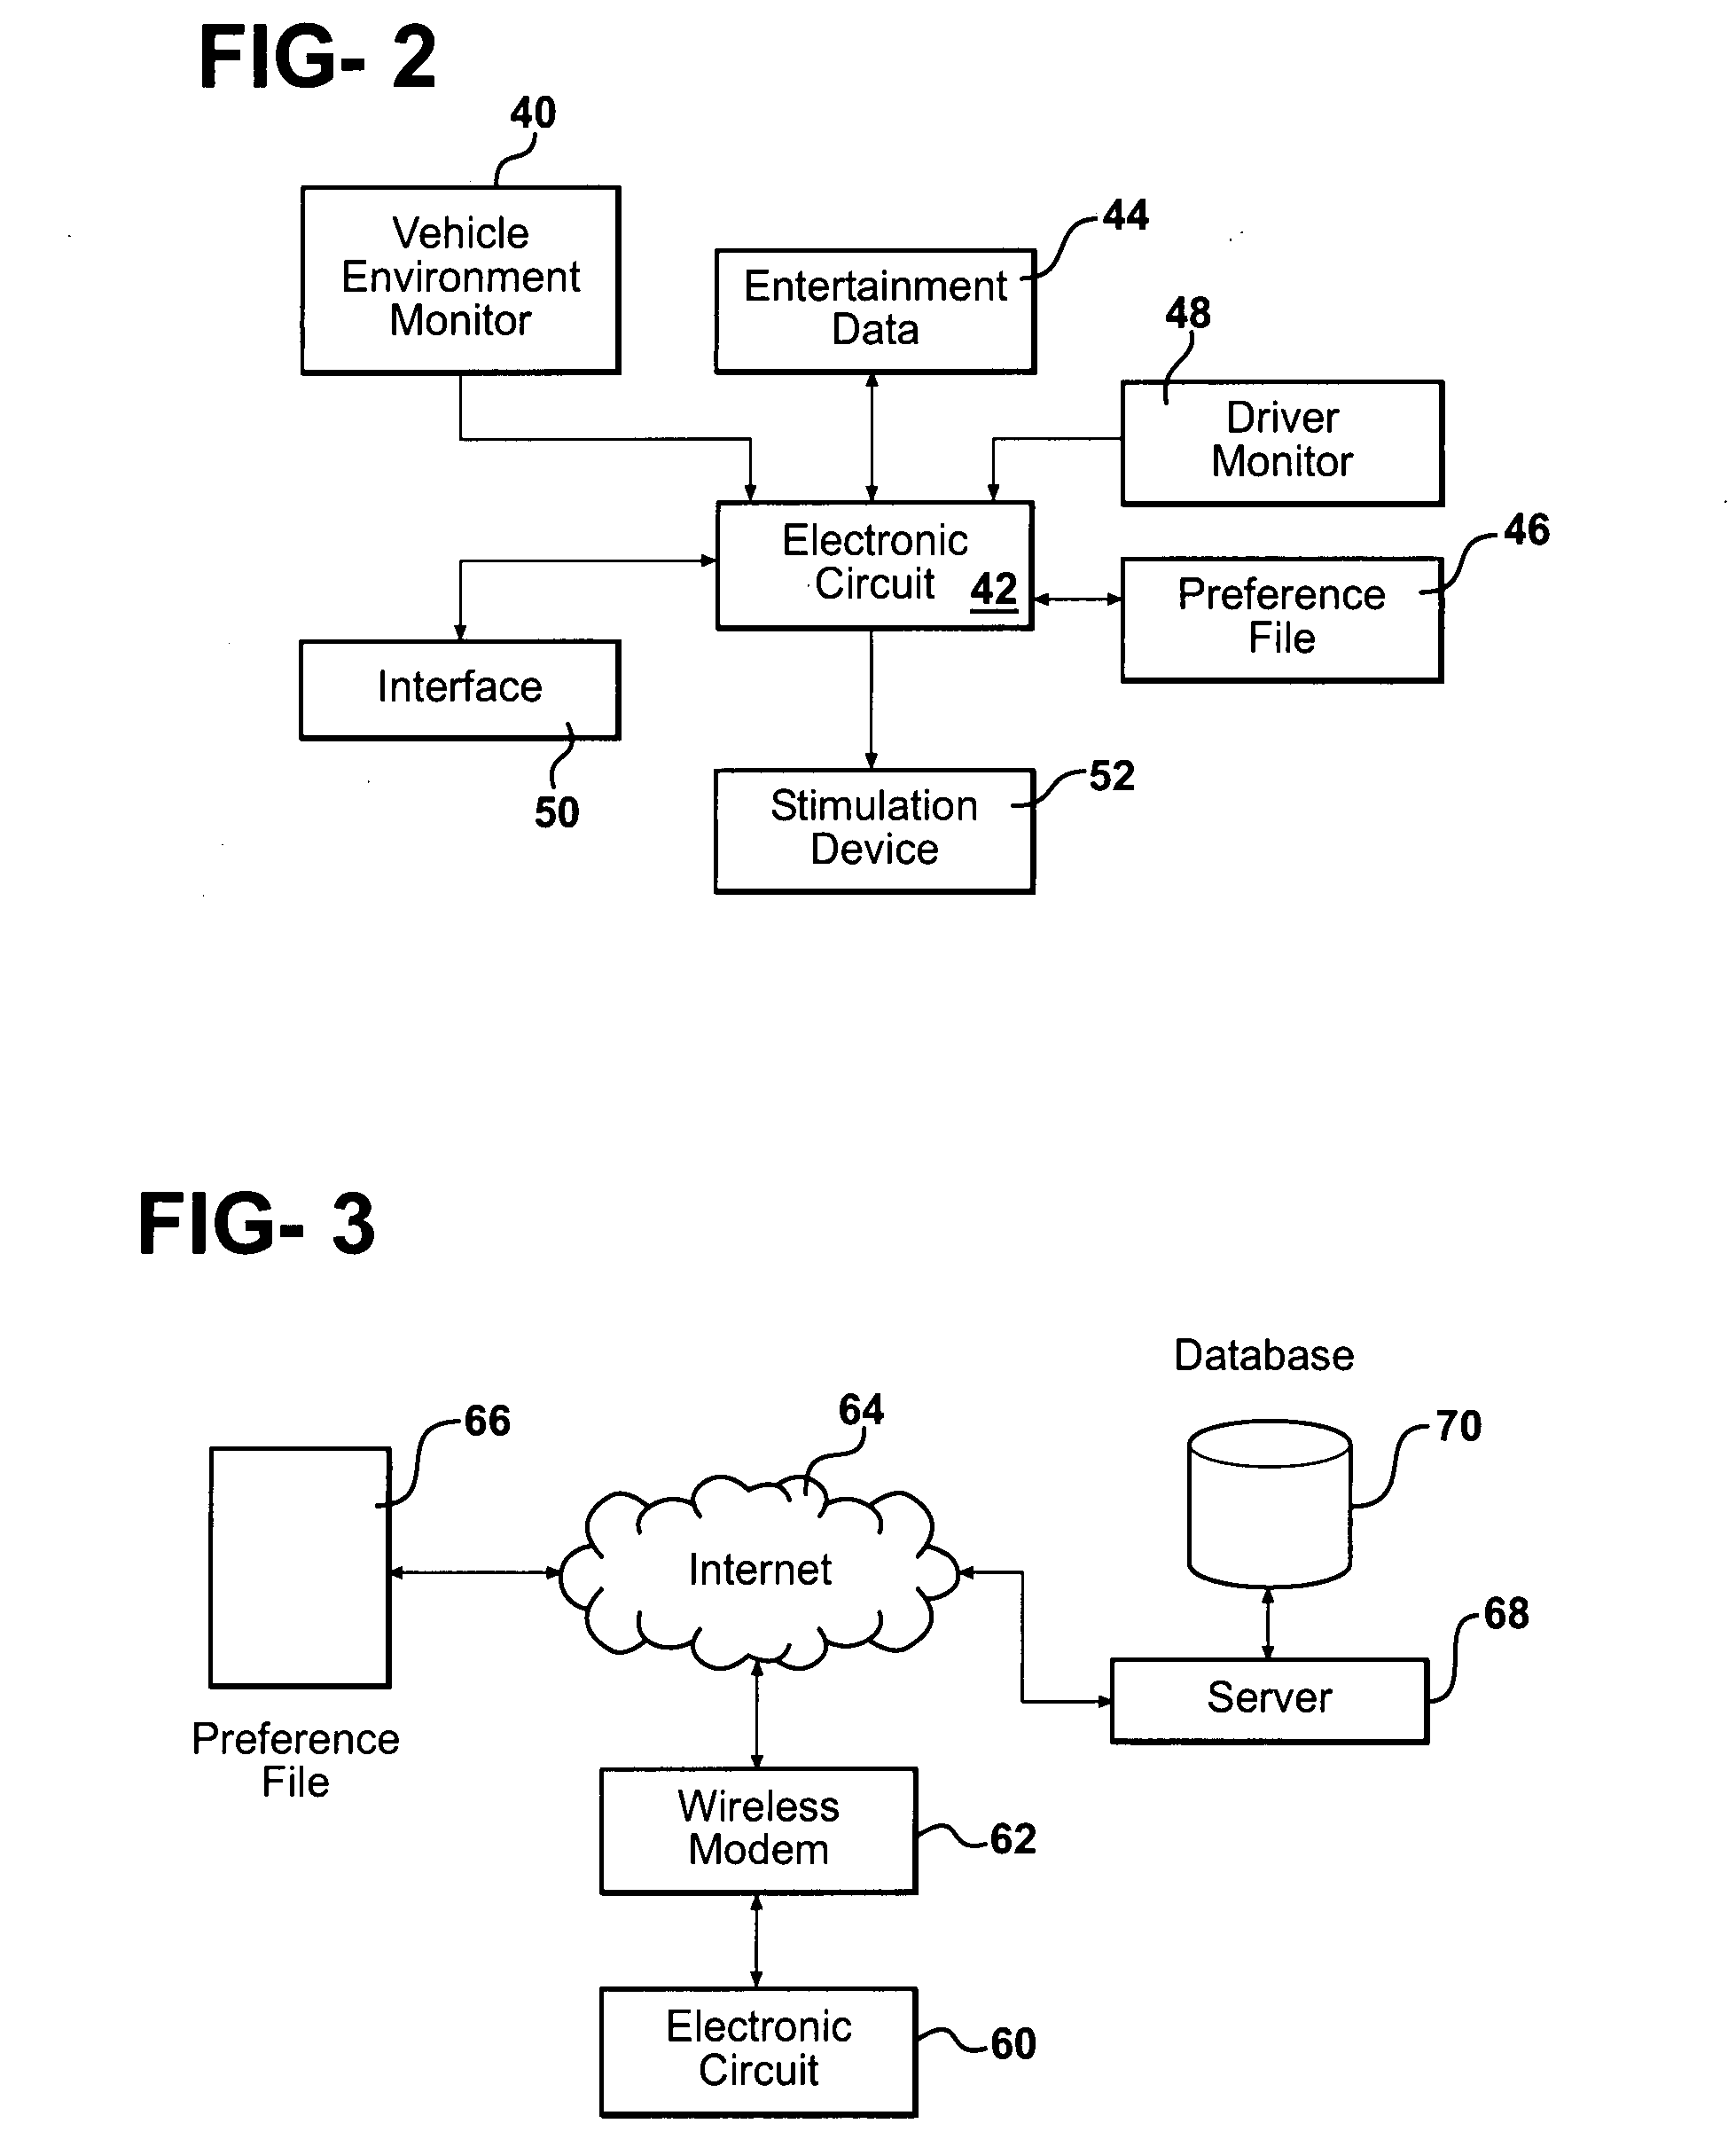 System and method for reducing boredom while driving